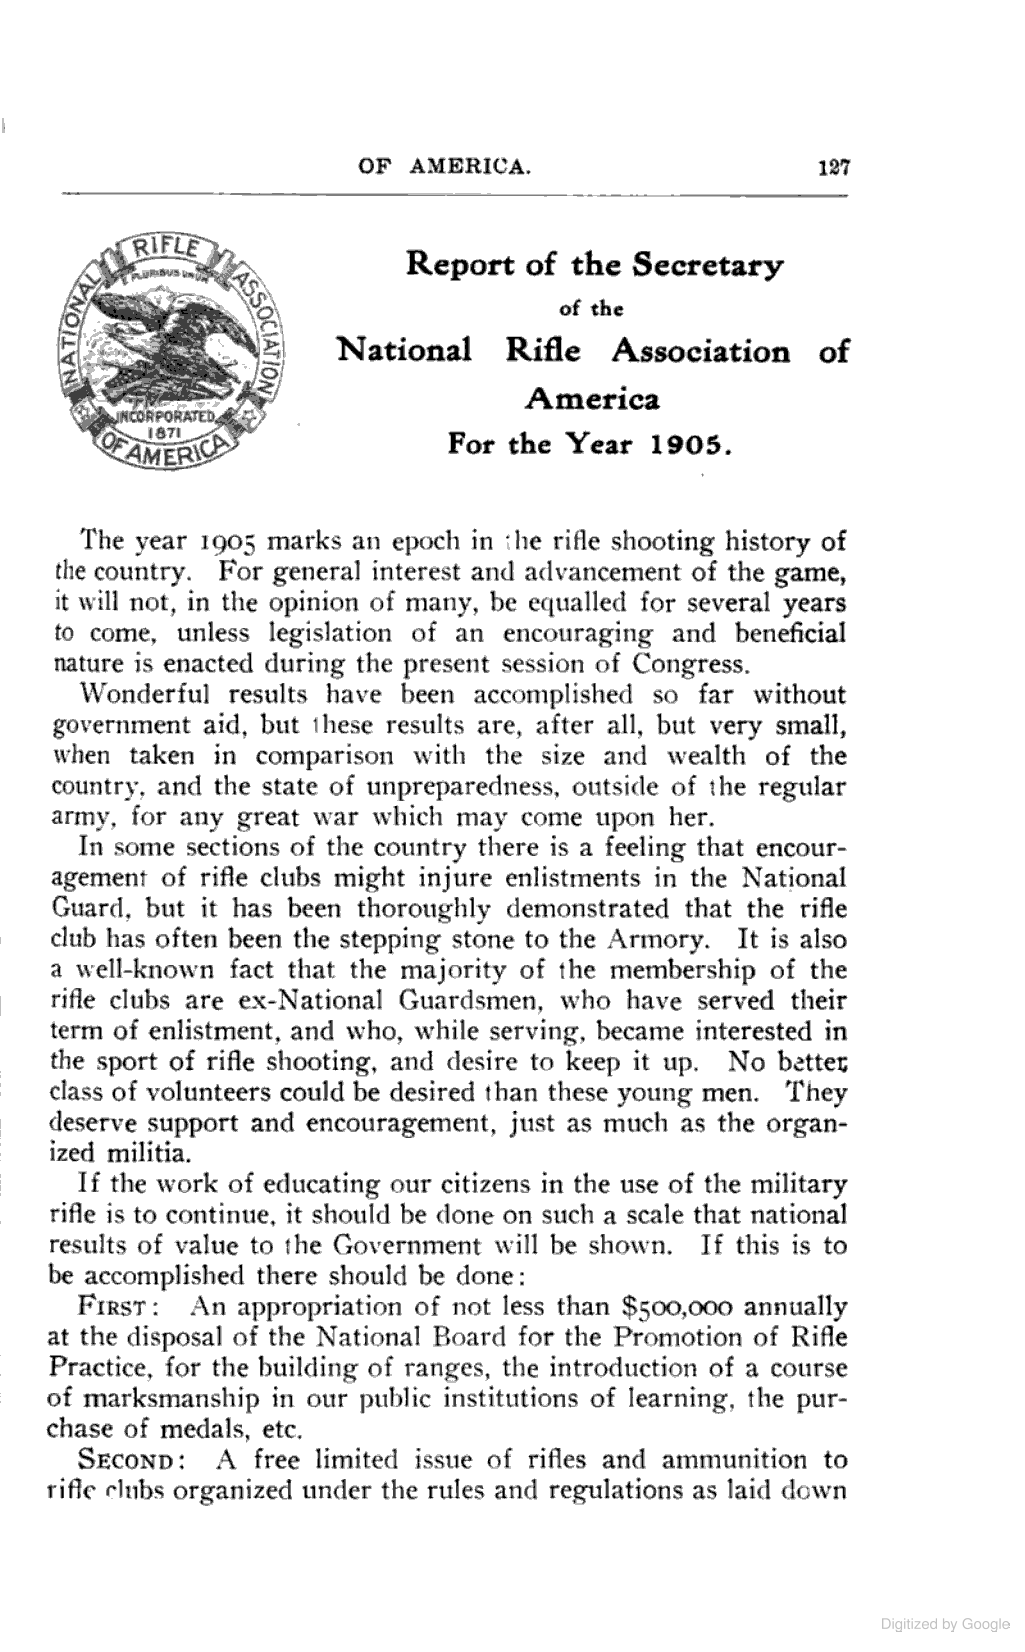 nra 1905 annual report.png